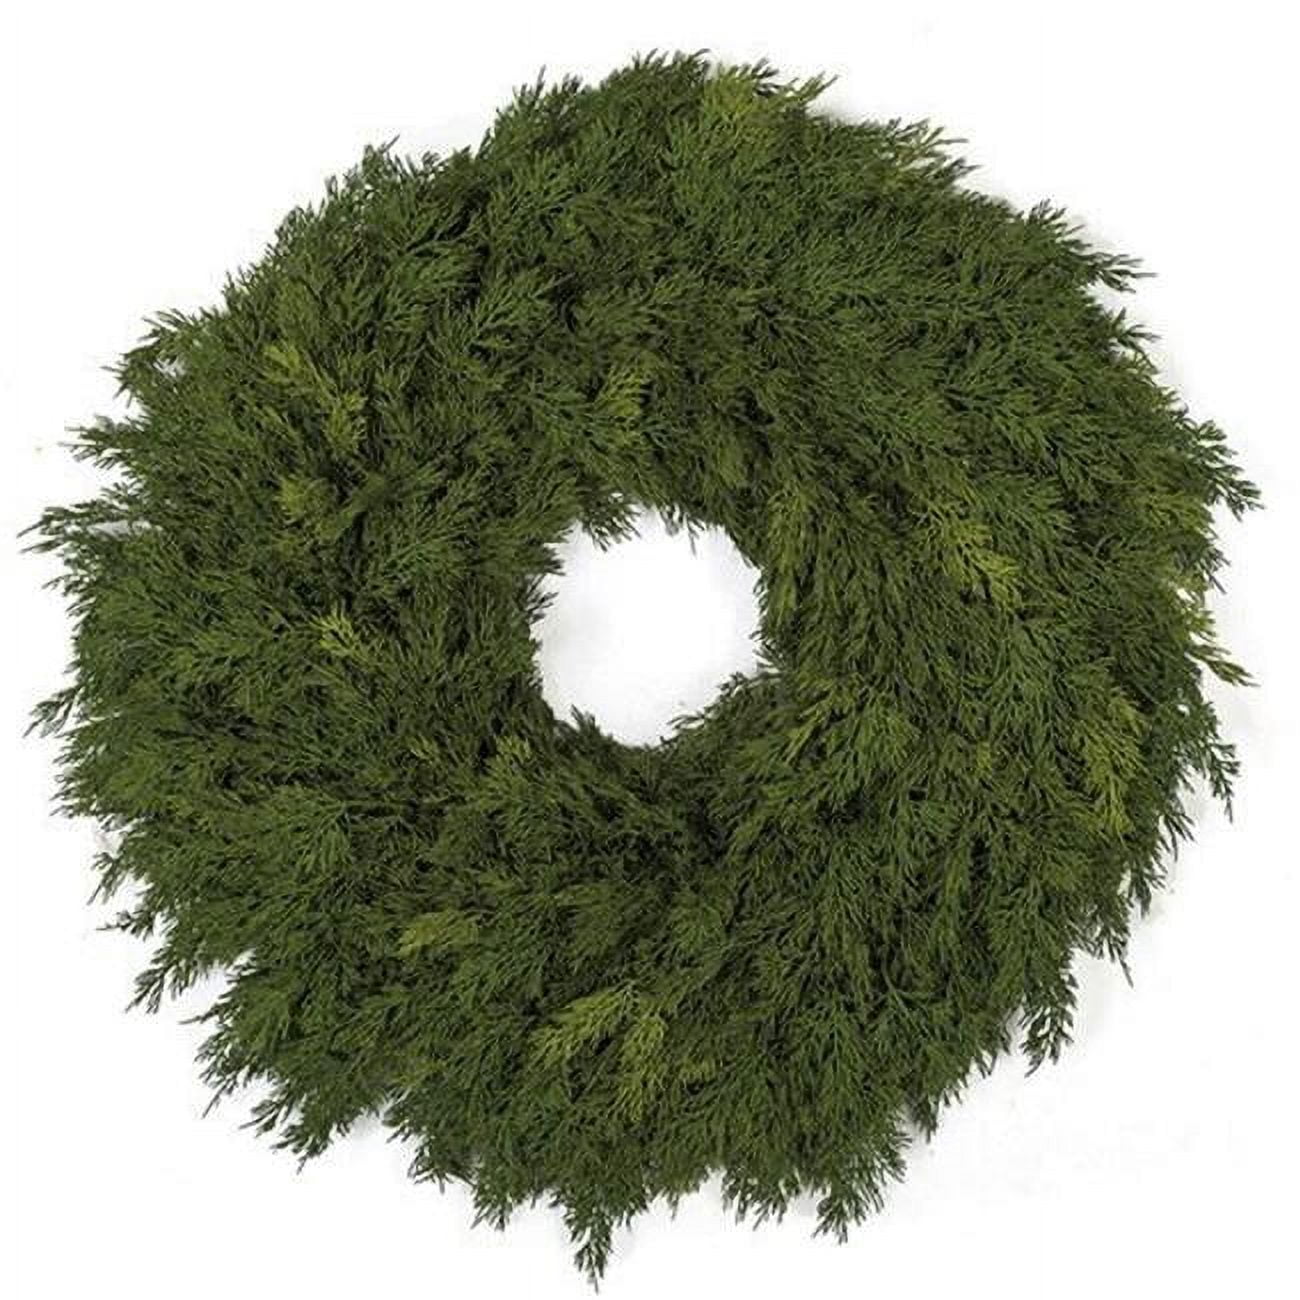 Picture of Autograph Foliages A-184310 28 in. Mixed Pine Wreath, Green